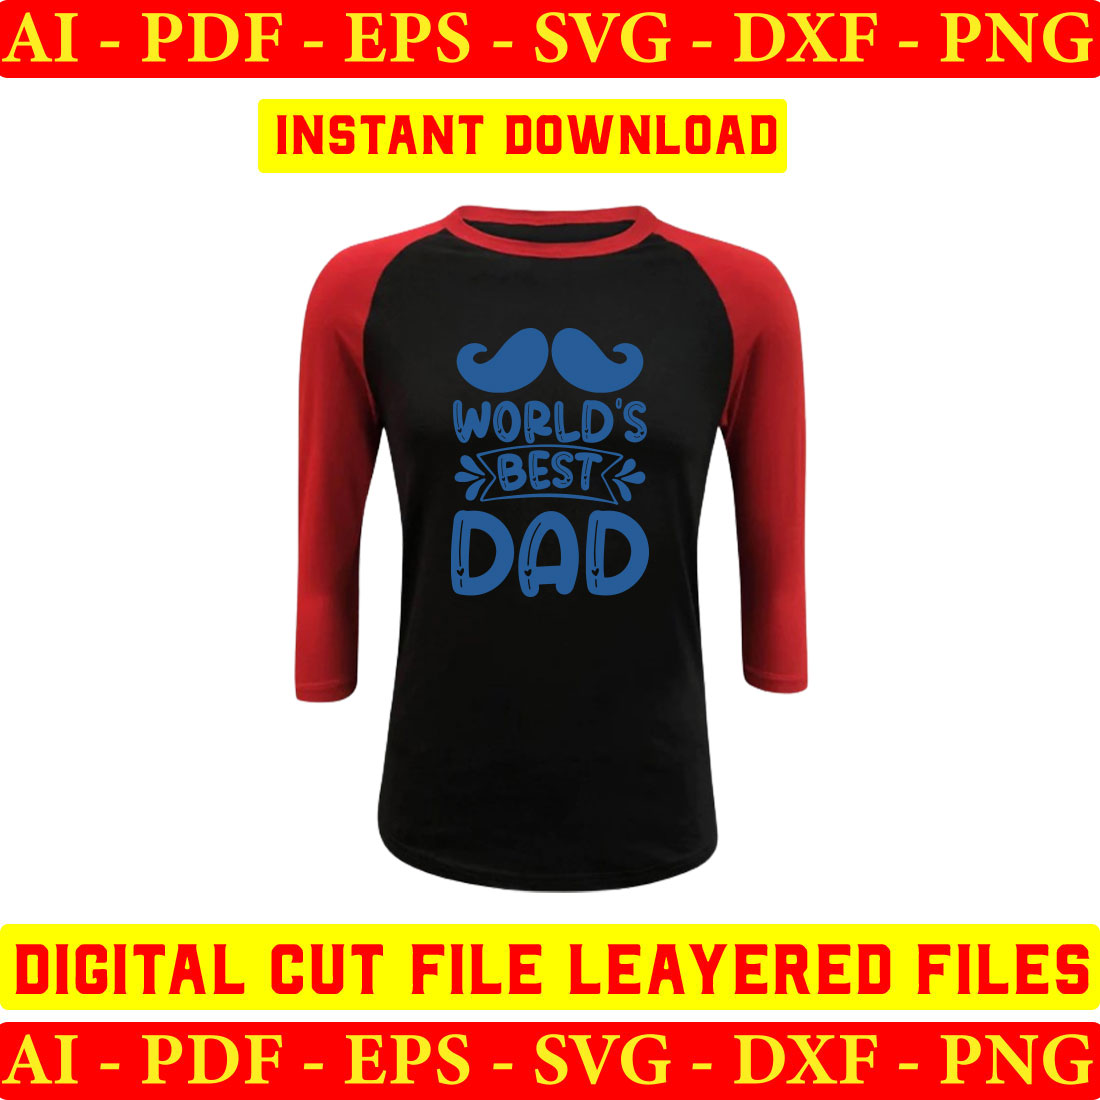 Black and red shirt with the words world's best dad on it.